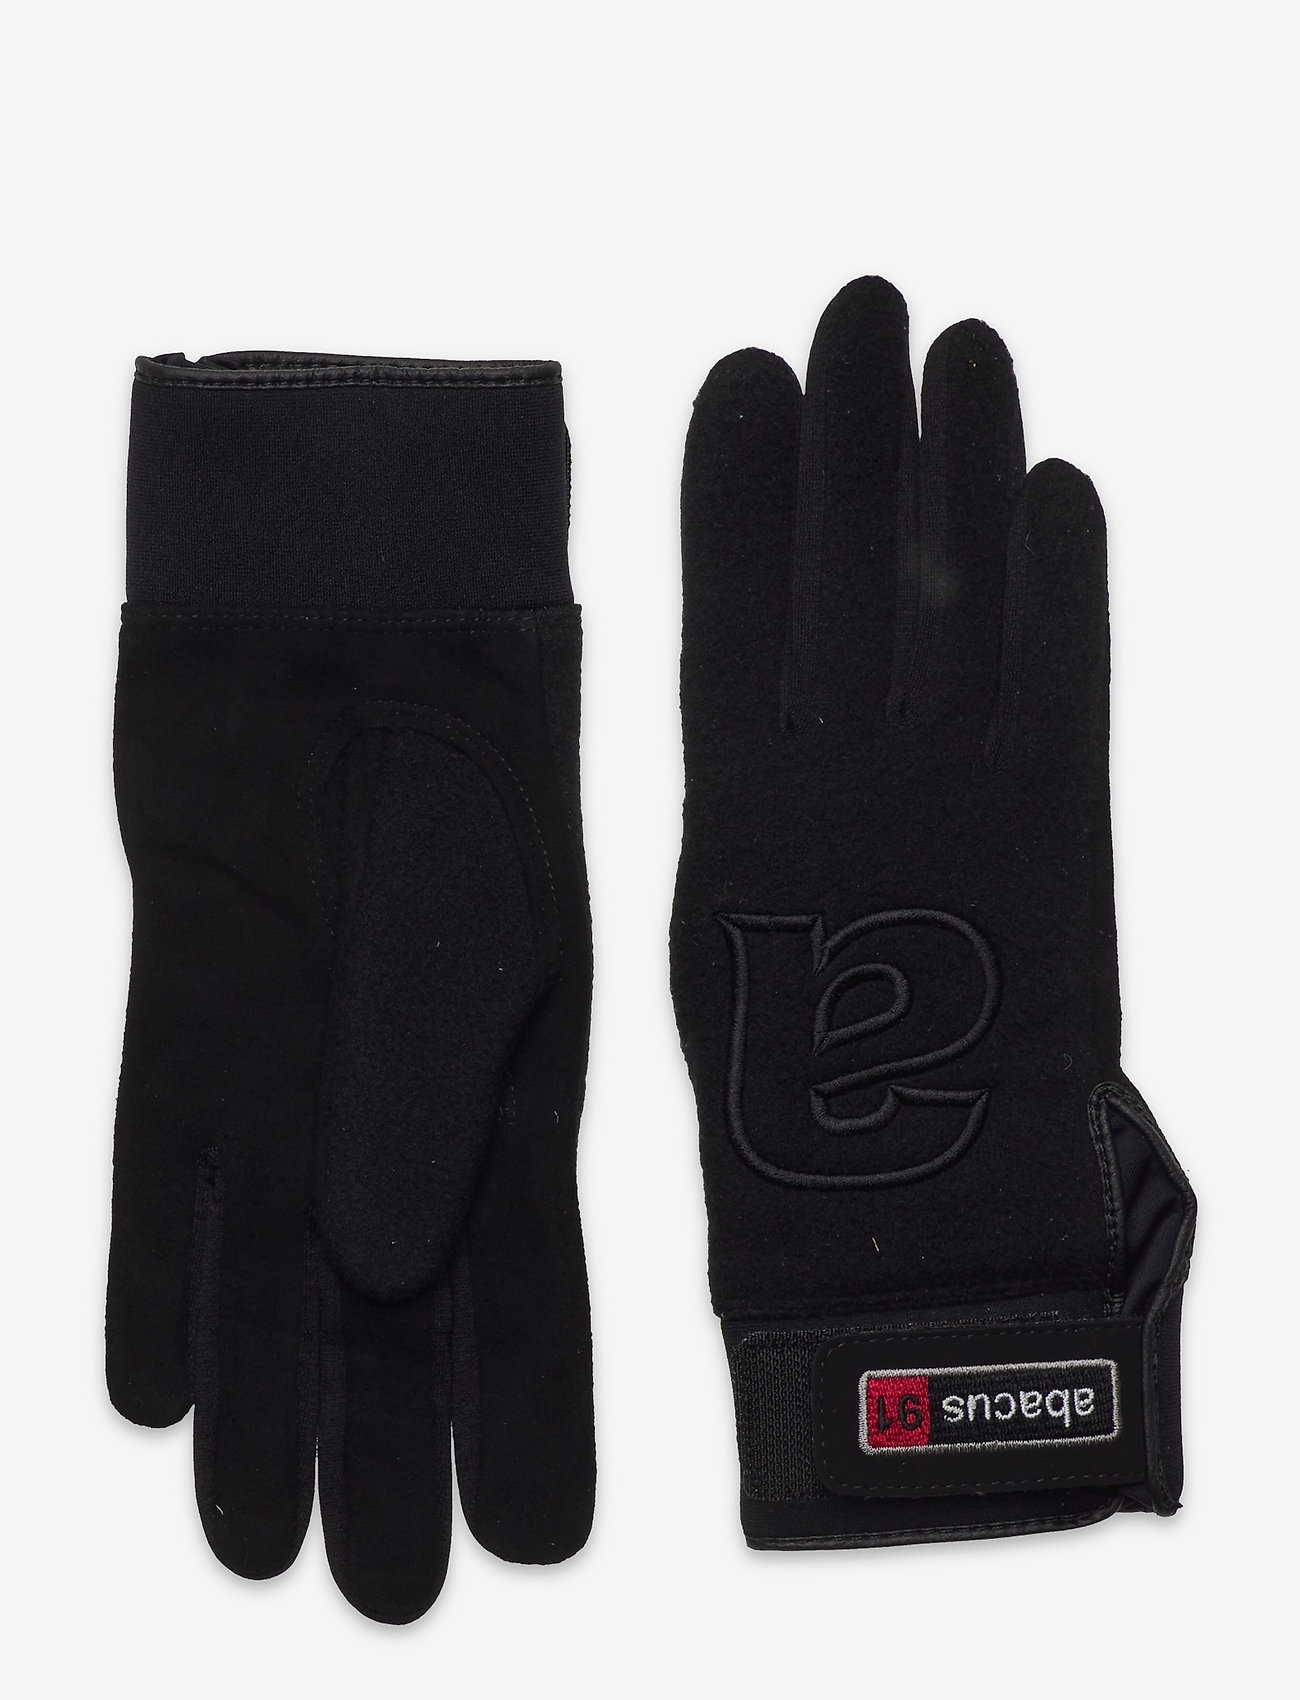 Abacus - Lds abacus winterglove,pair - gloves - black - 0